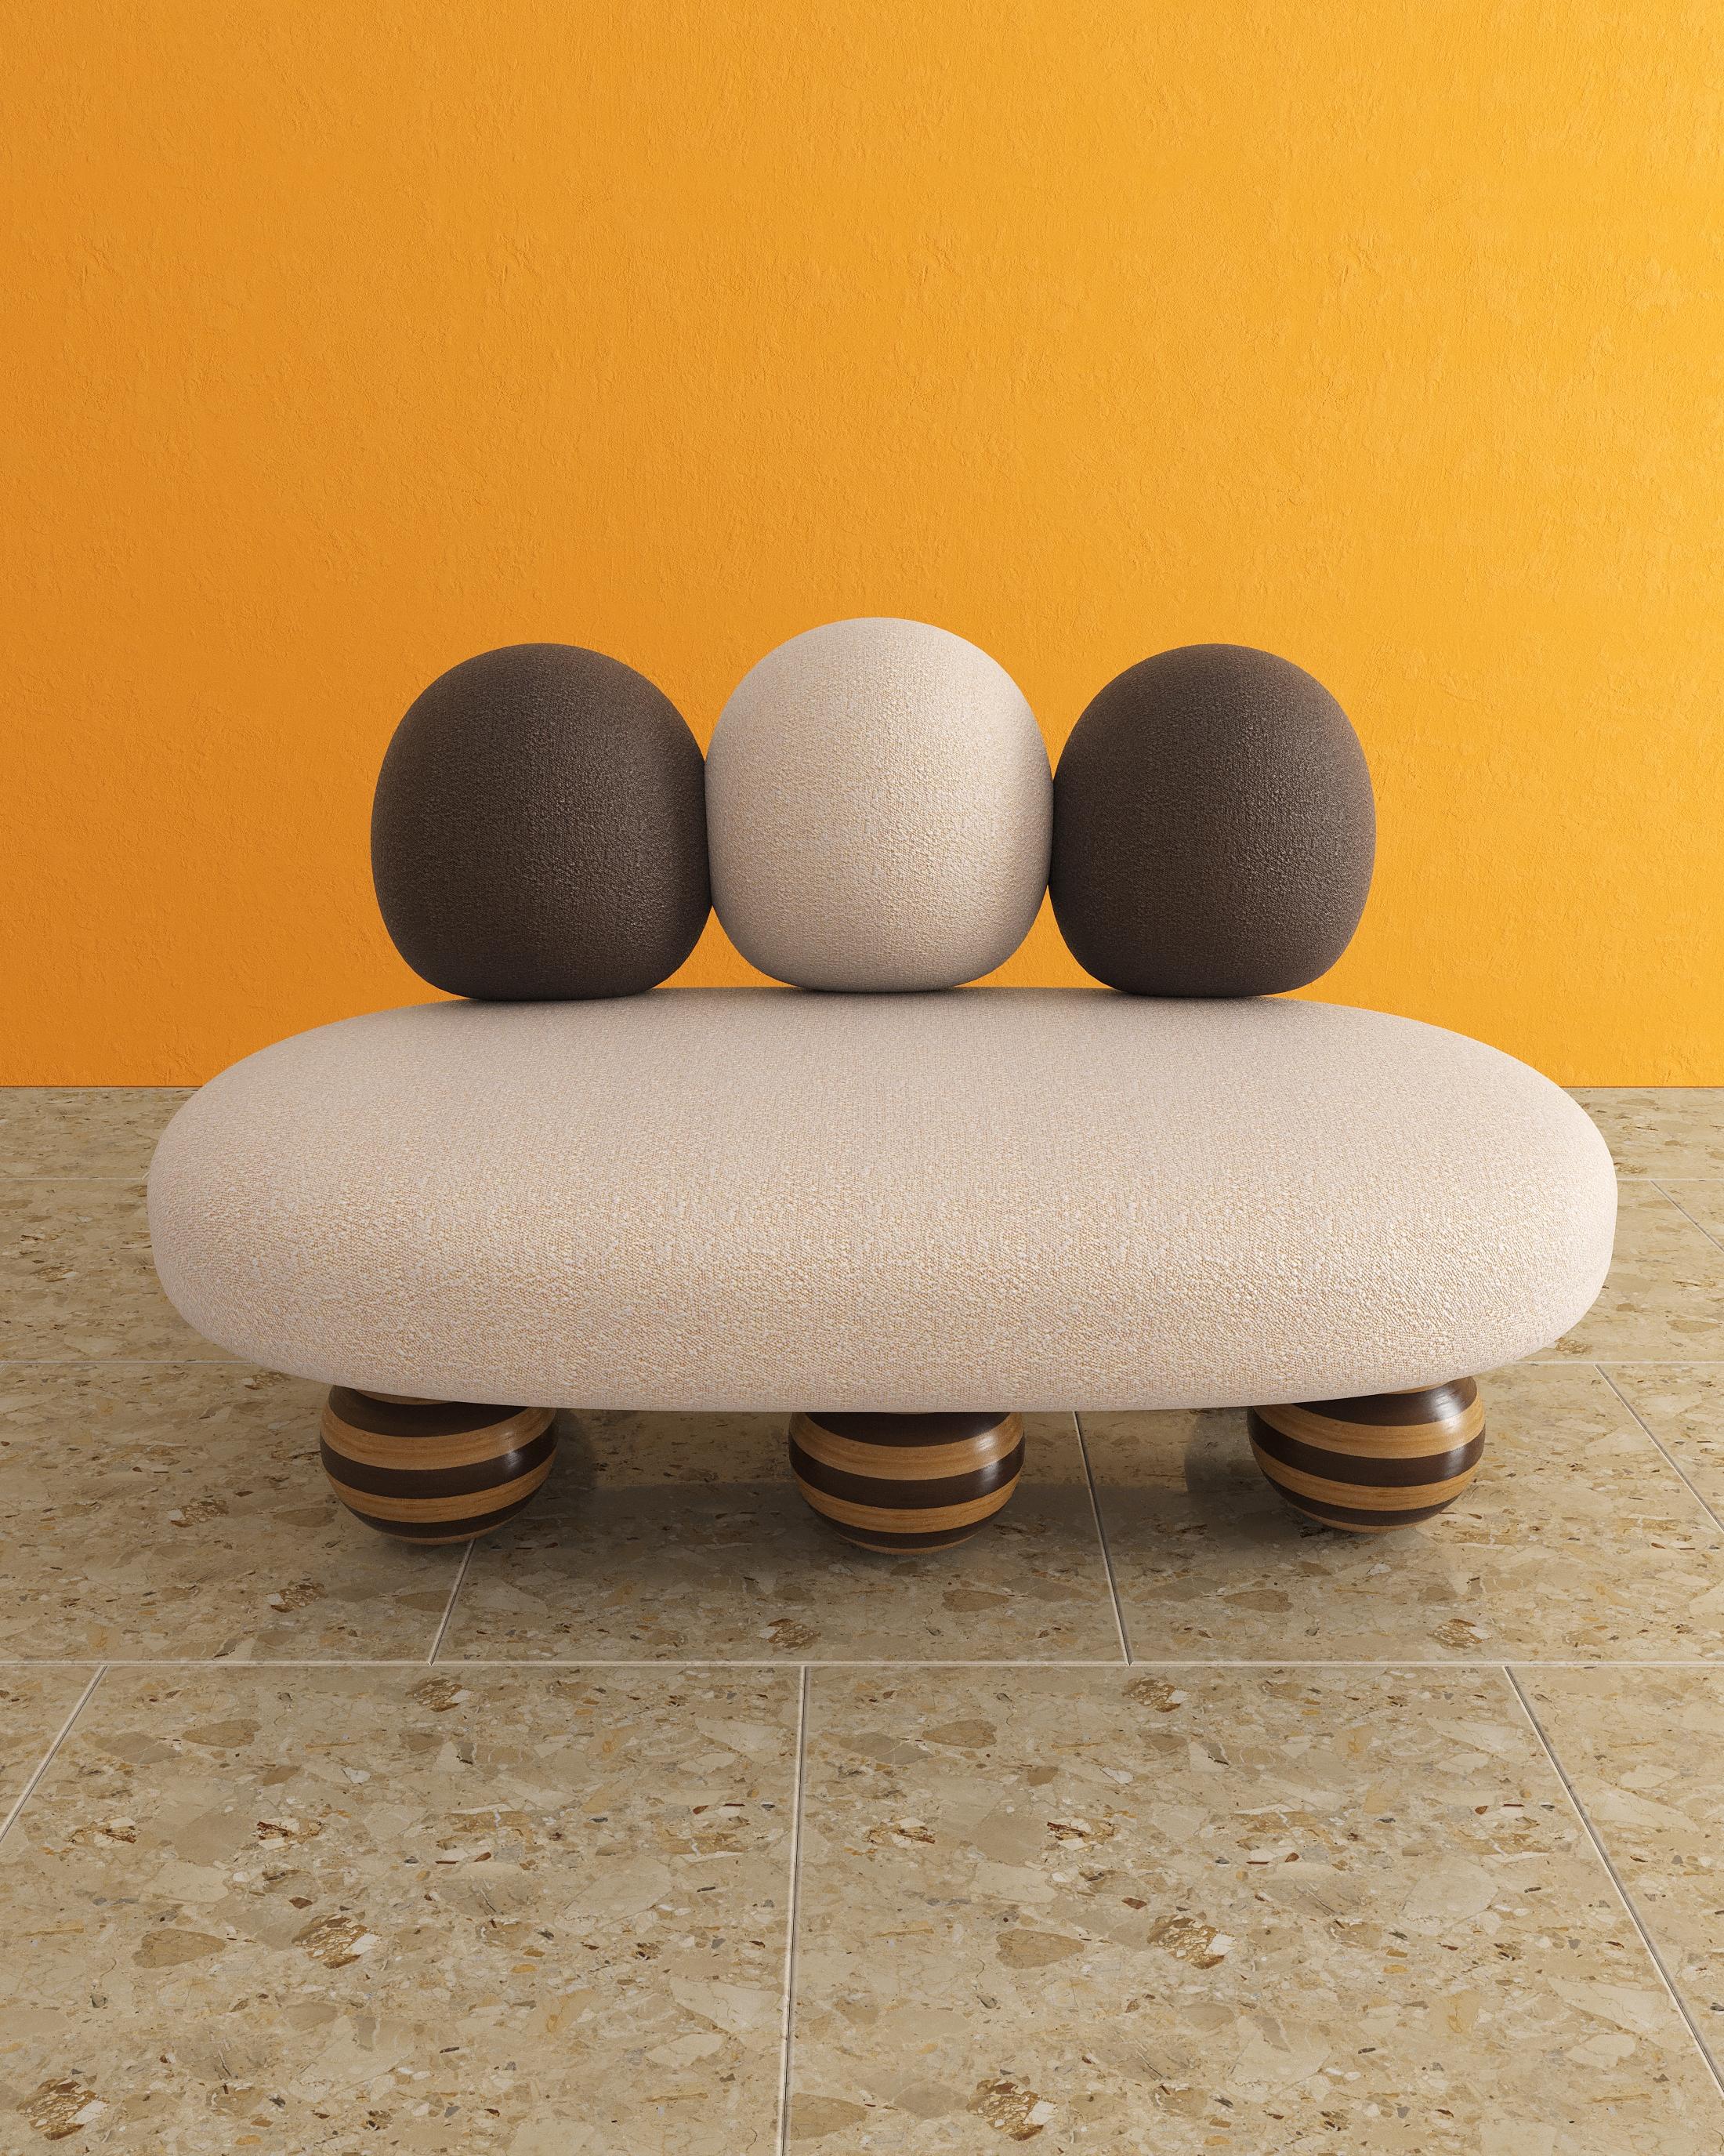 Introducing the Momo sofa - an avant garde design. This piece is designed with earth tones and shapes in mind. The Momo Sofa has six oakwood legs, ensuring stability and durability. Polythene foam padding is used for extra comfort, upholstered in e